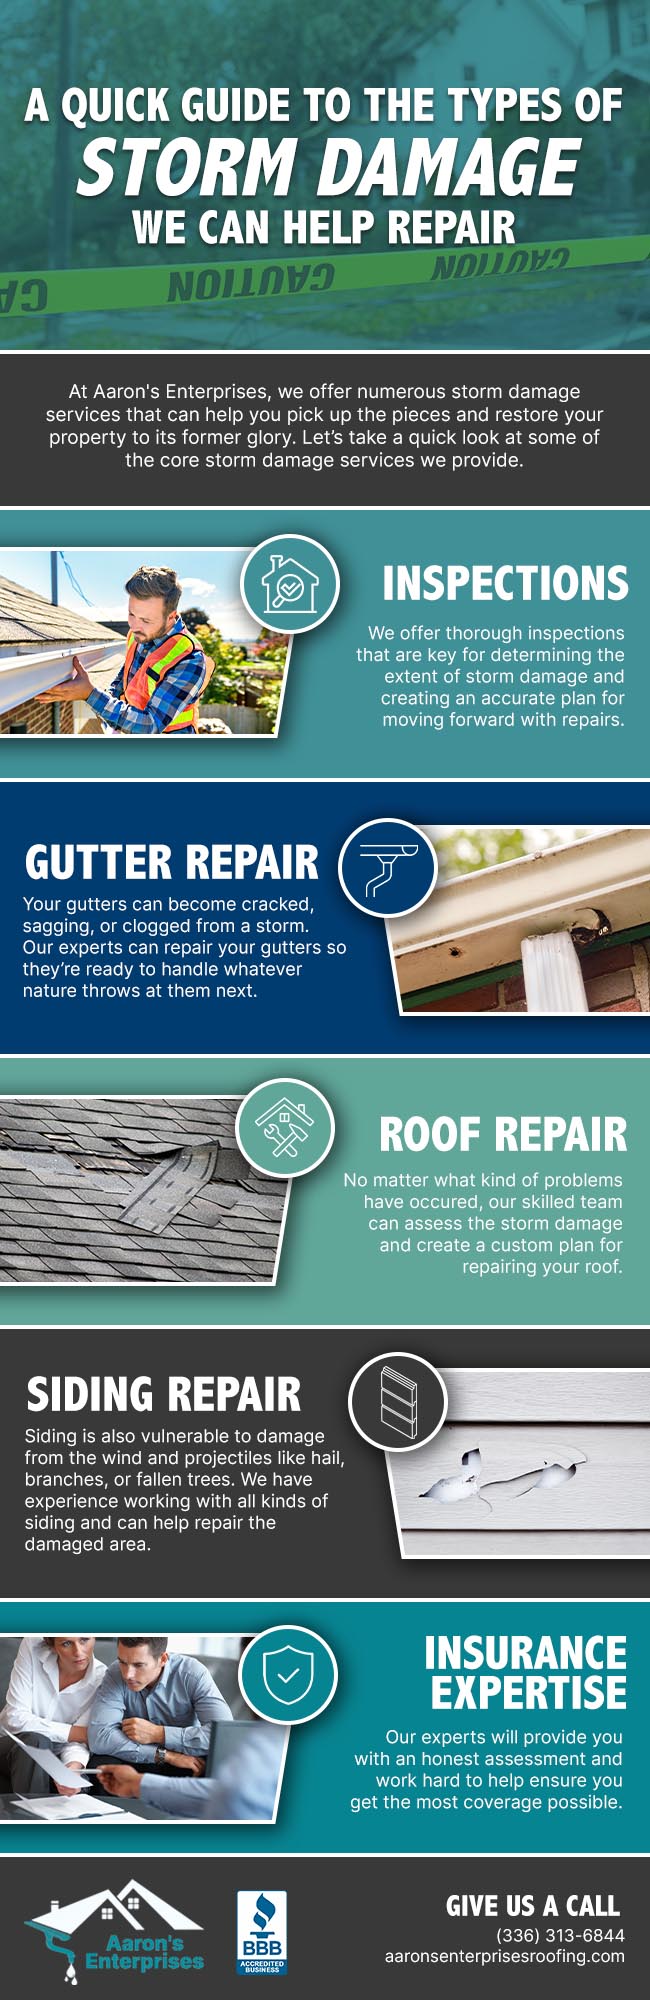 We’re your go-to storm damage repair professionals.